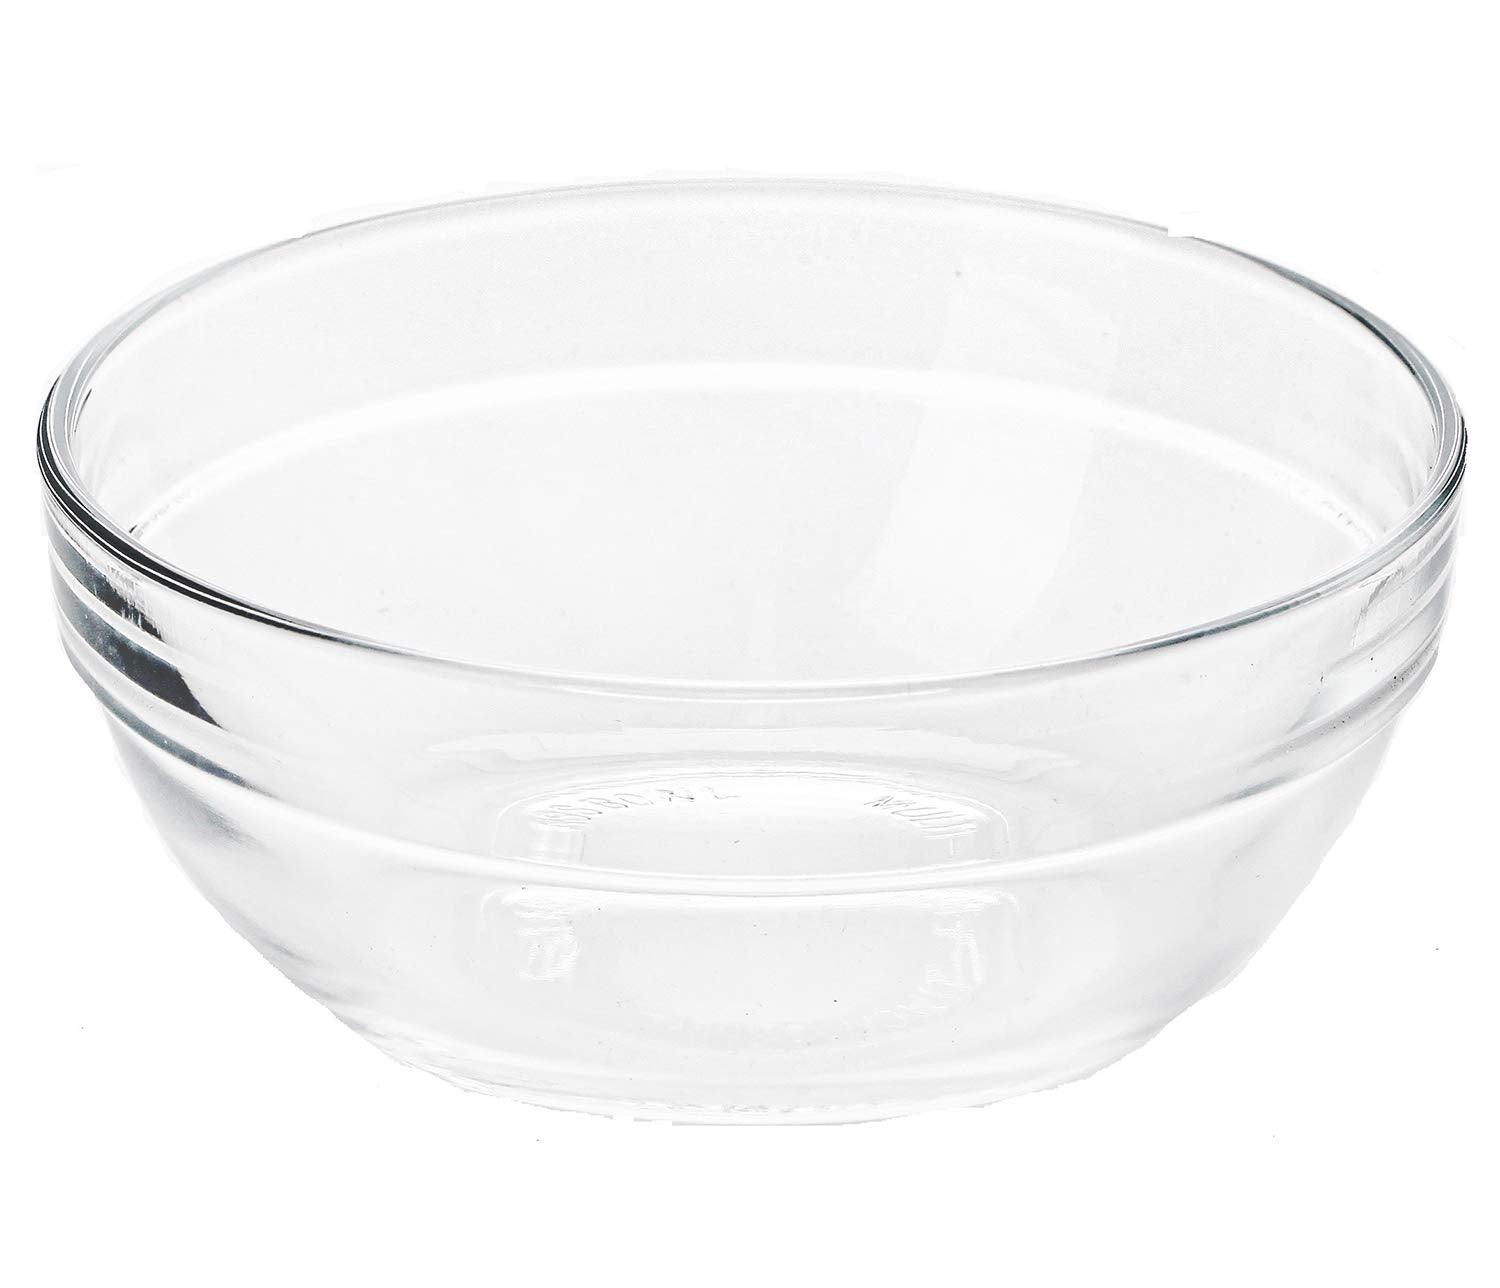 Lawei Set of 12 Glass Bowls - 3.5 inch Mini Prep Bowls Serving Bowls Glass Salad Bowl for Kitchen Prep, Dessert, Dips, Candy Dishes - CookCave